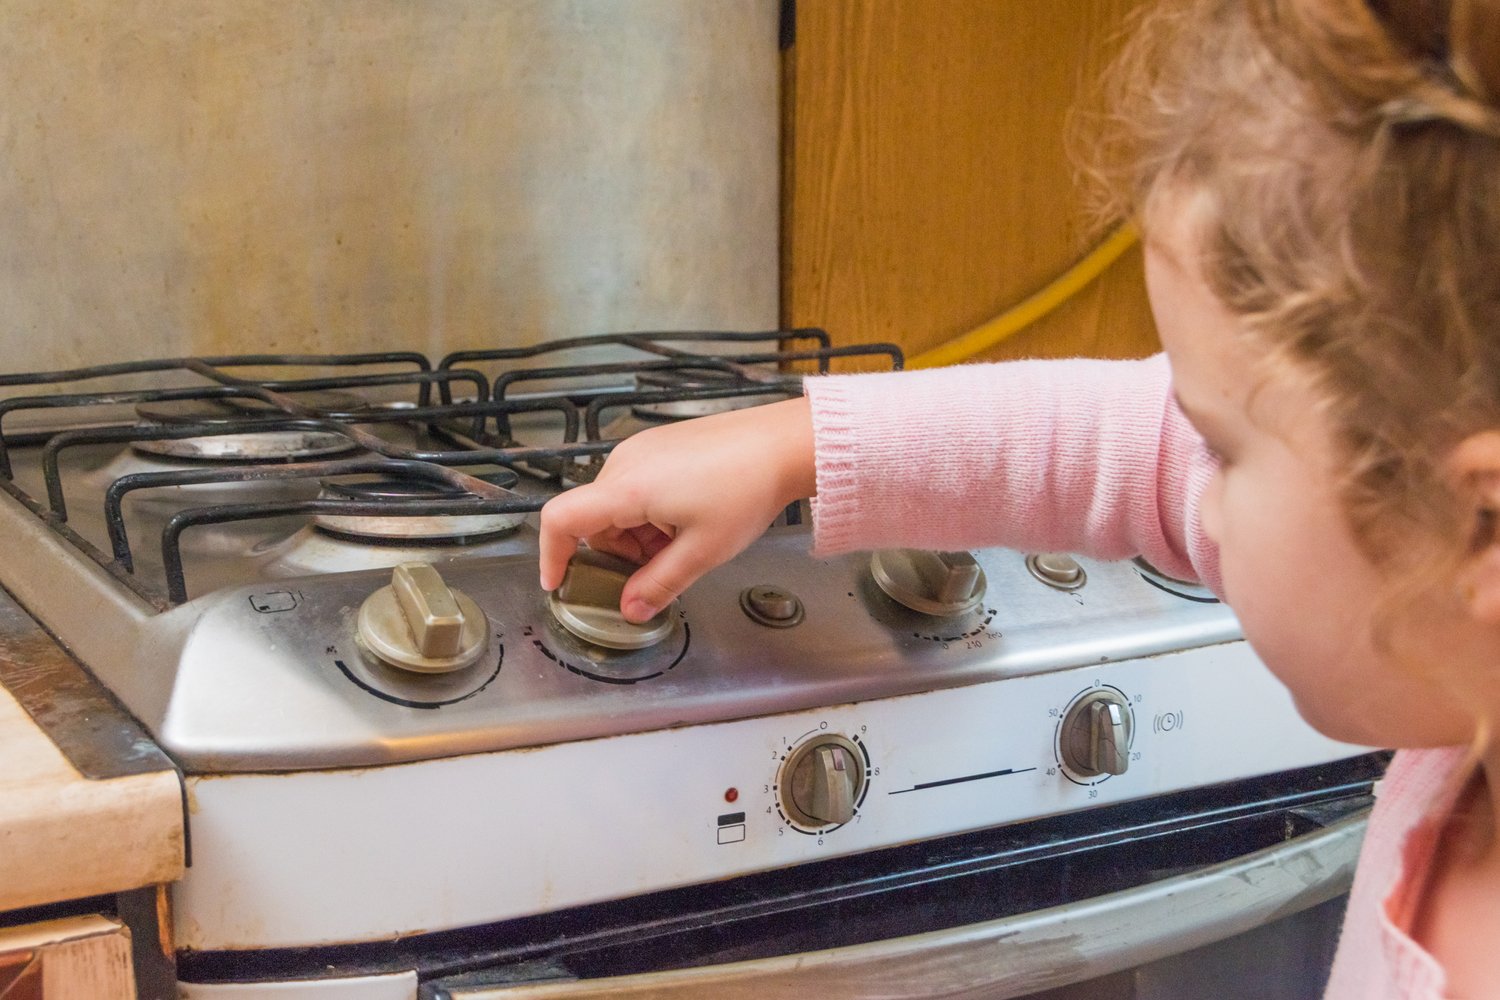 4 EASY Tips to Keep Your Kitchen Safe for Kids — RangeSafe, Protect Your  Loved Ones